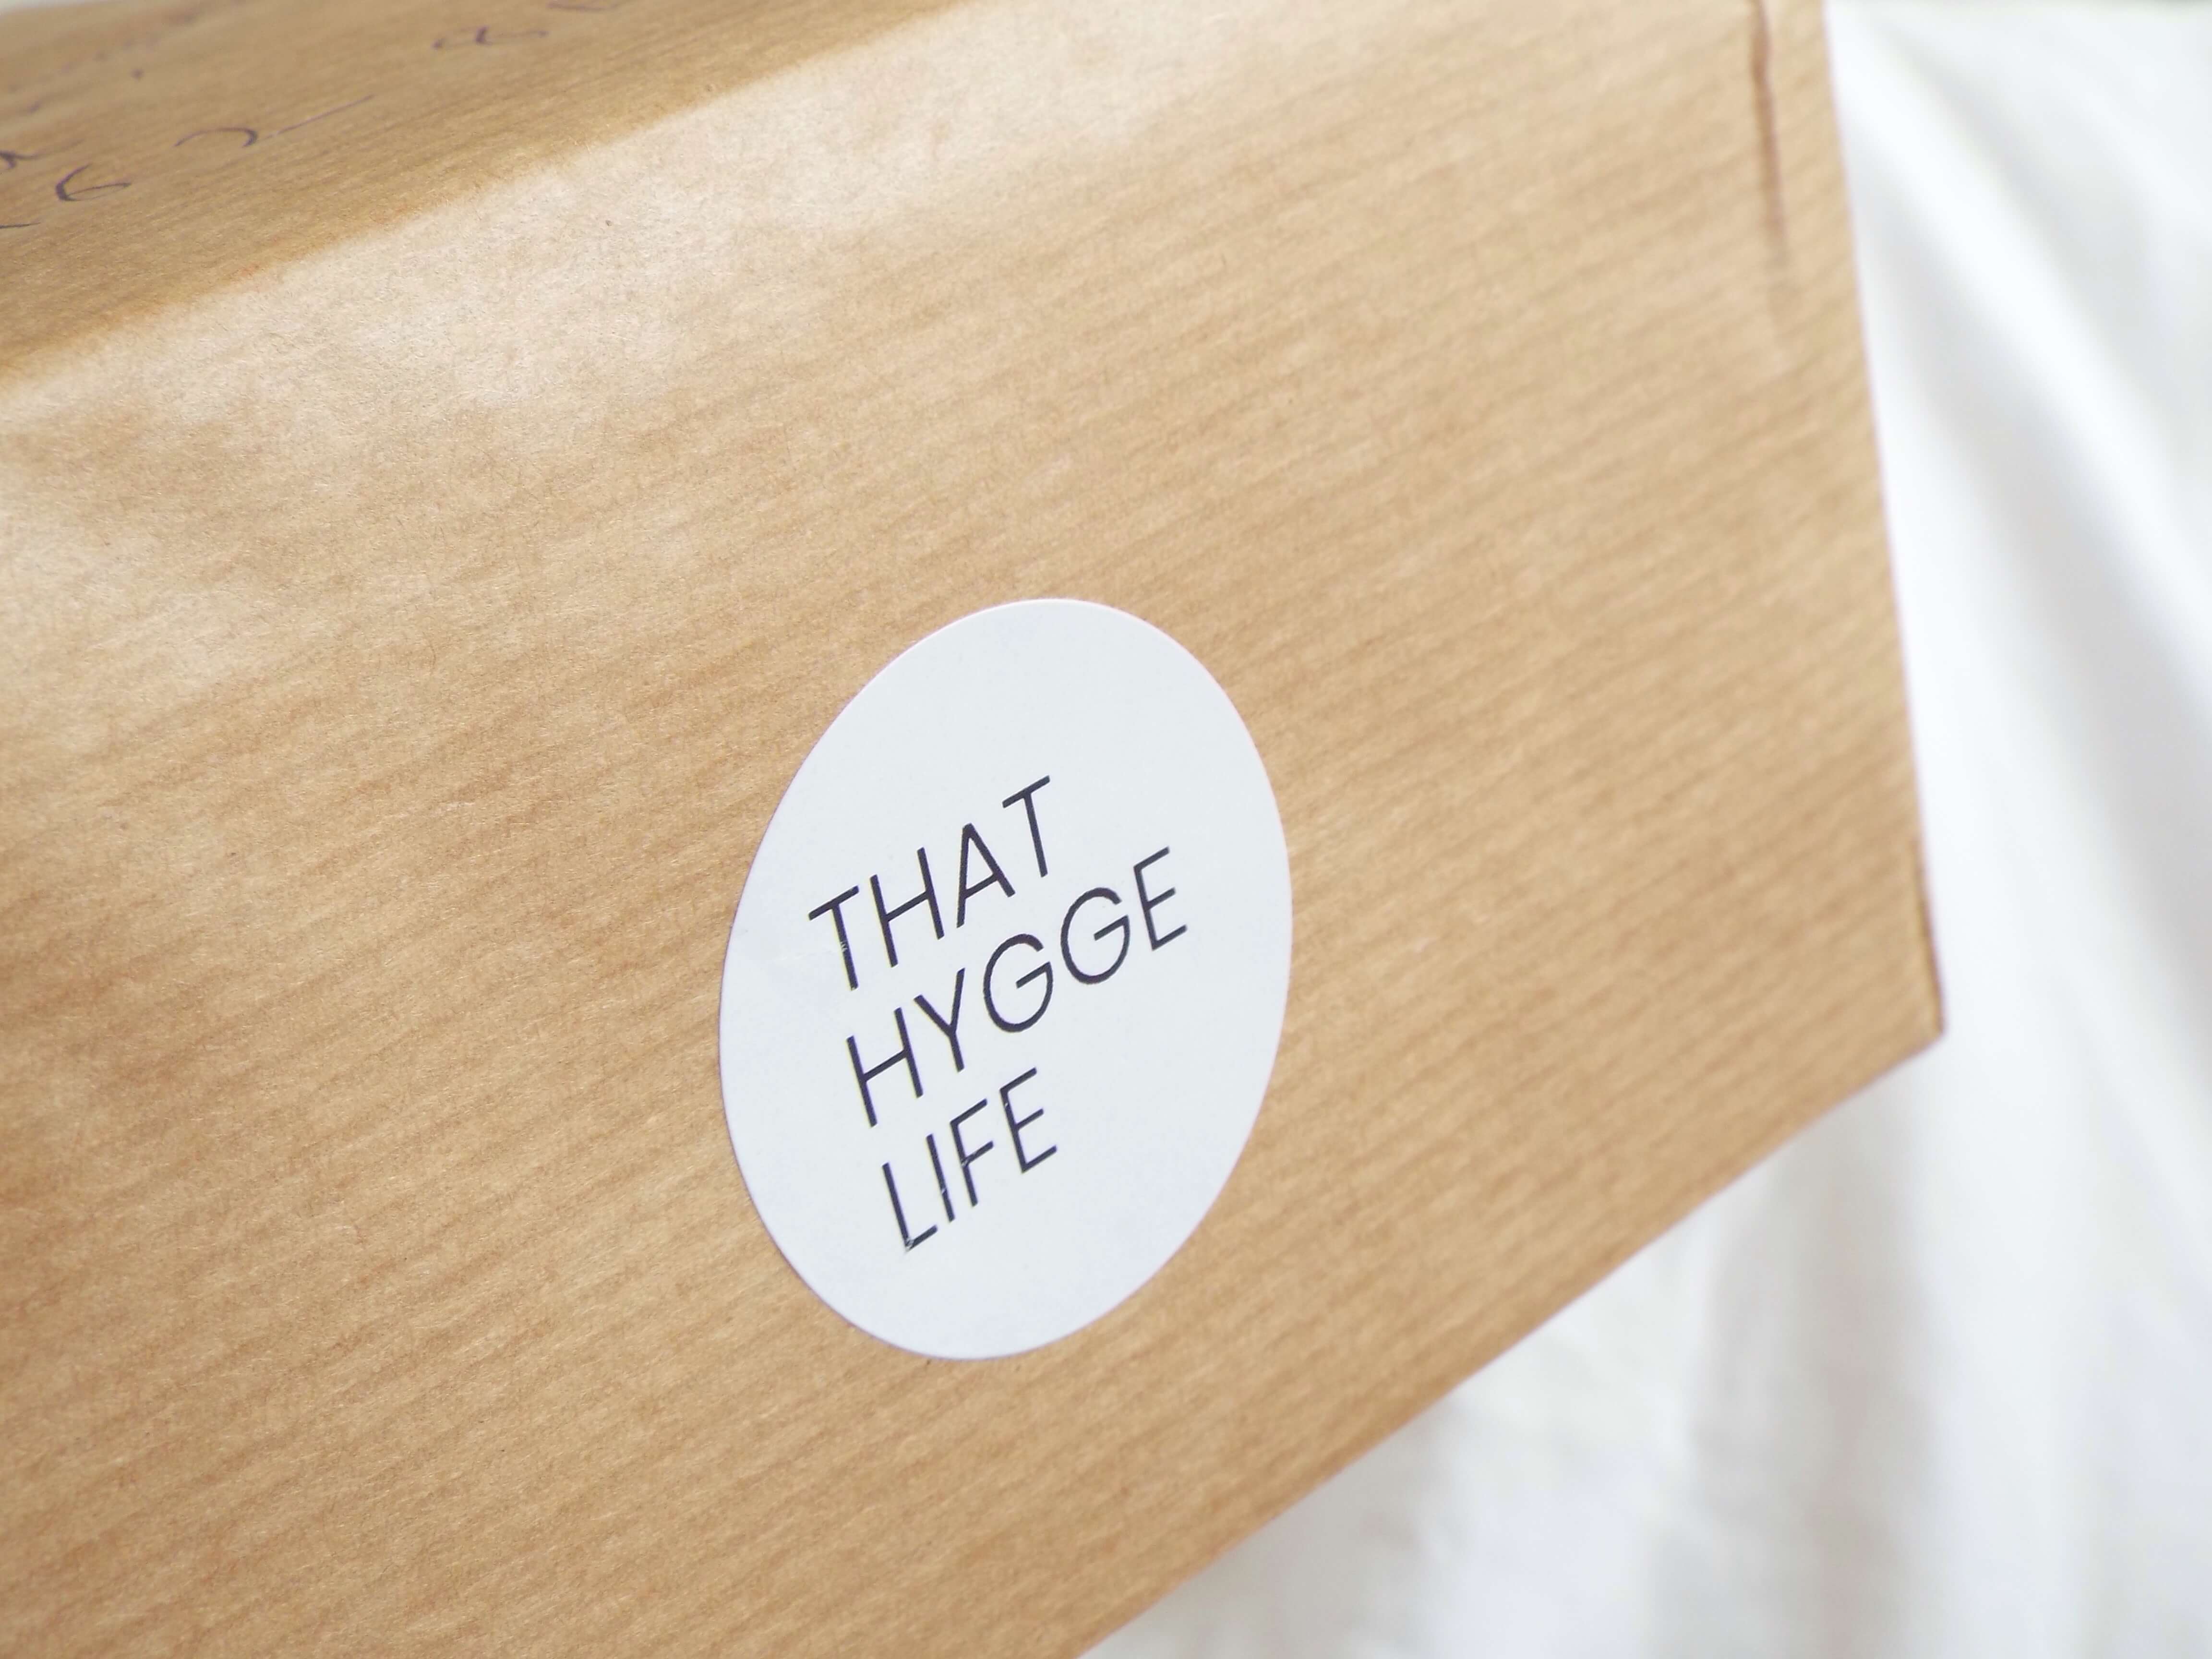 That Hygge Life white circle sticker on brown paper wrapping paper delivery box.